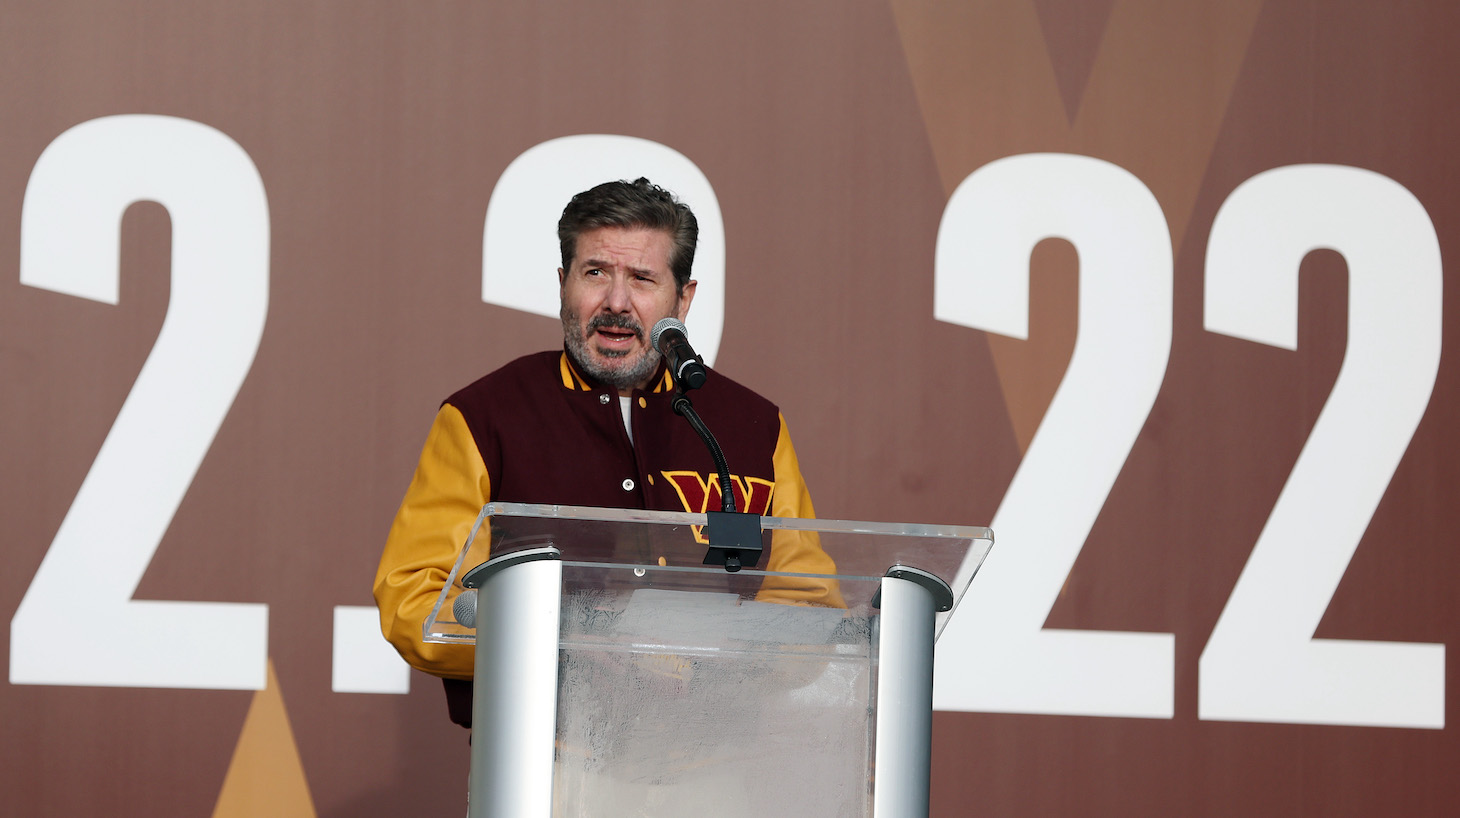 Team co-owner Dan Snyder speaks during the announcement of the Washington Football Team's name change to the Washington Commanders at FedExField on February 02, 2022 in Landover, Maryland.